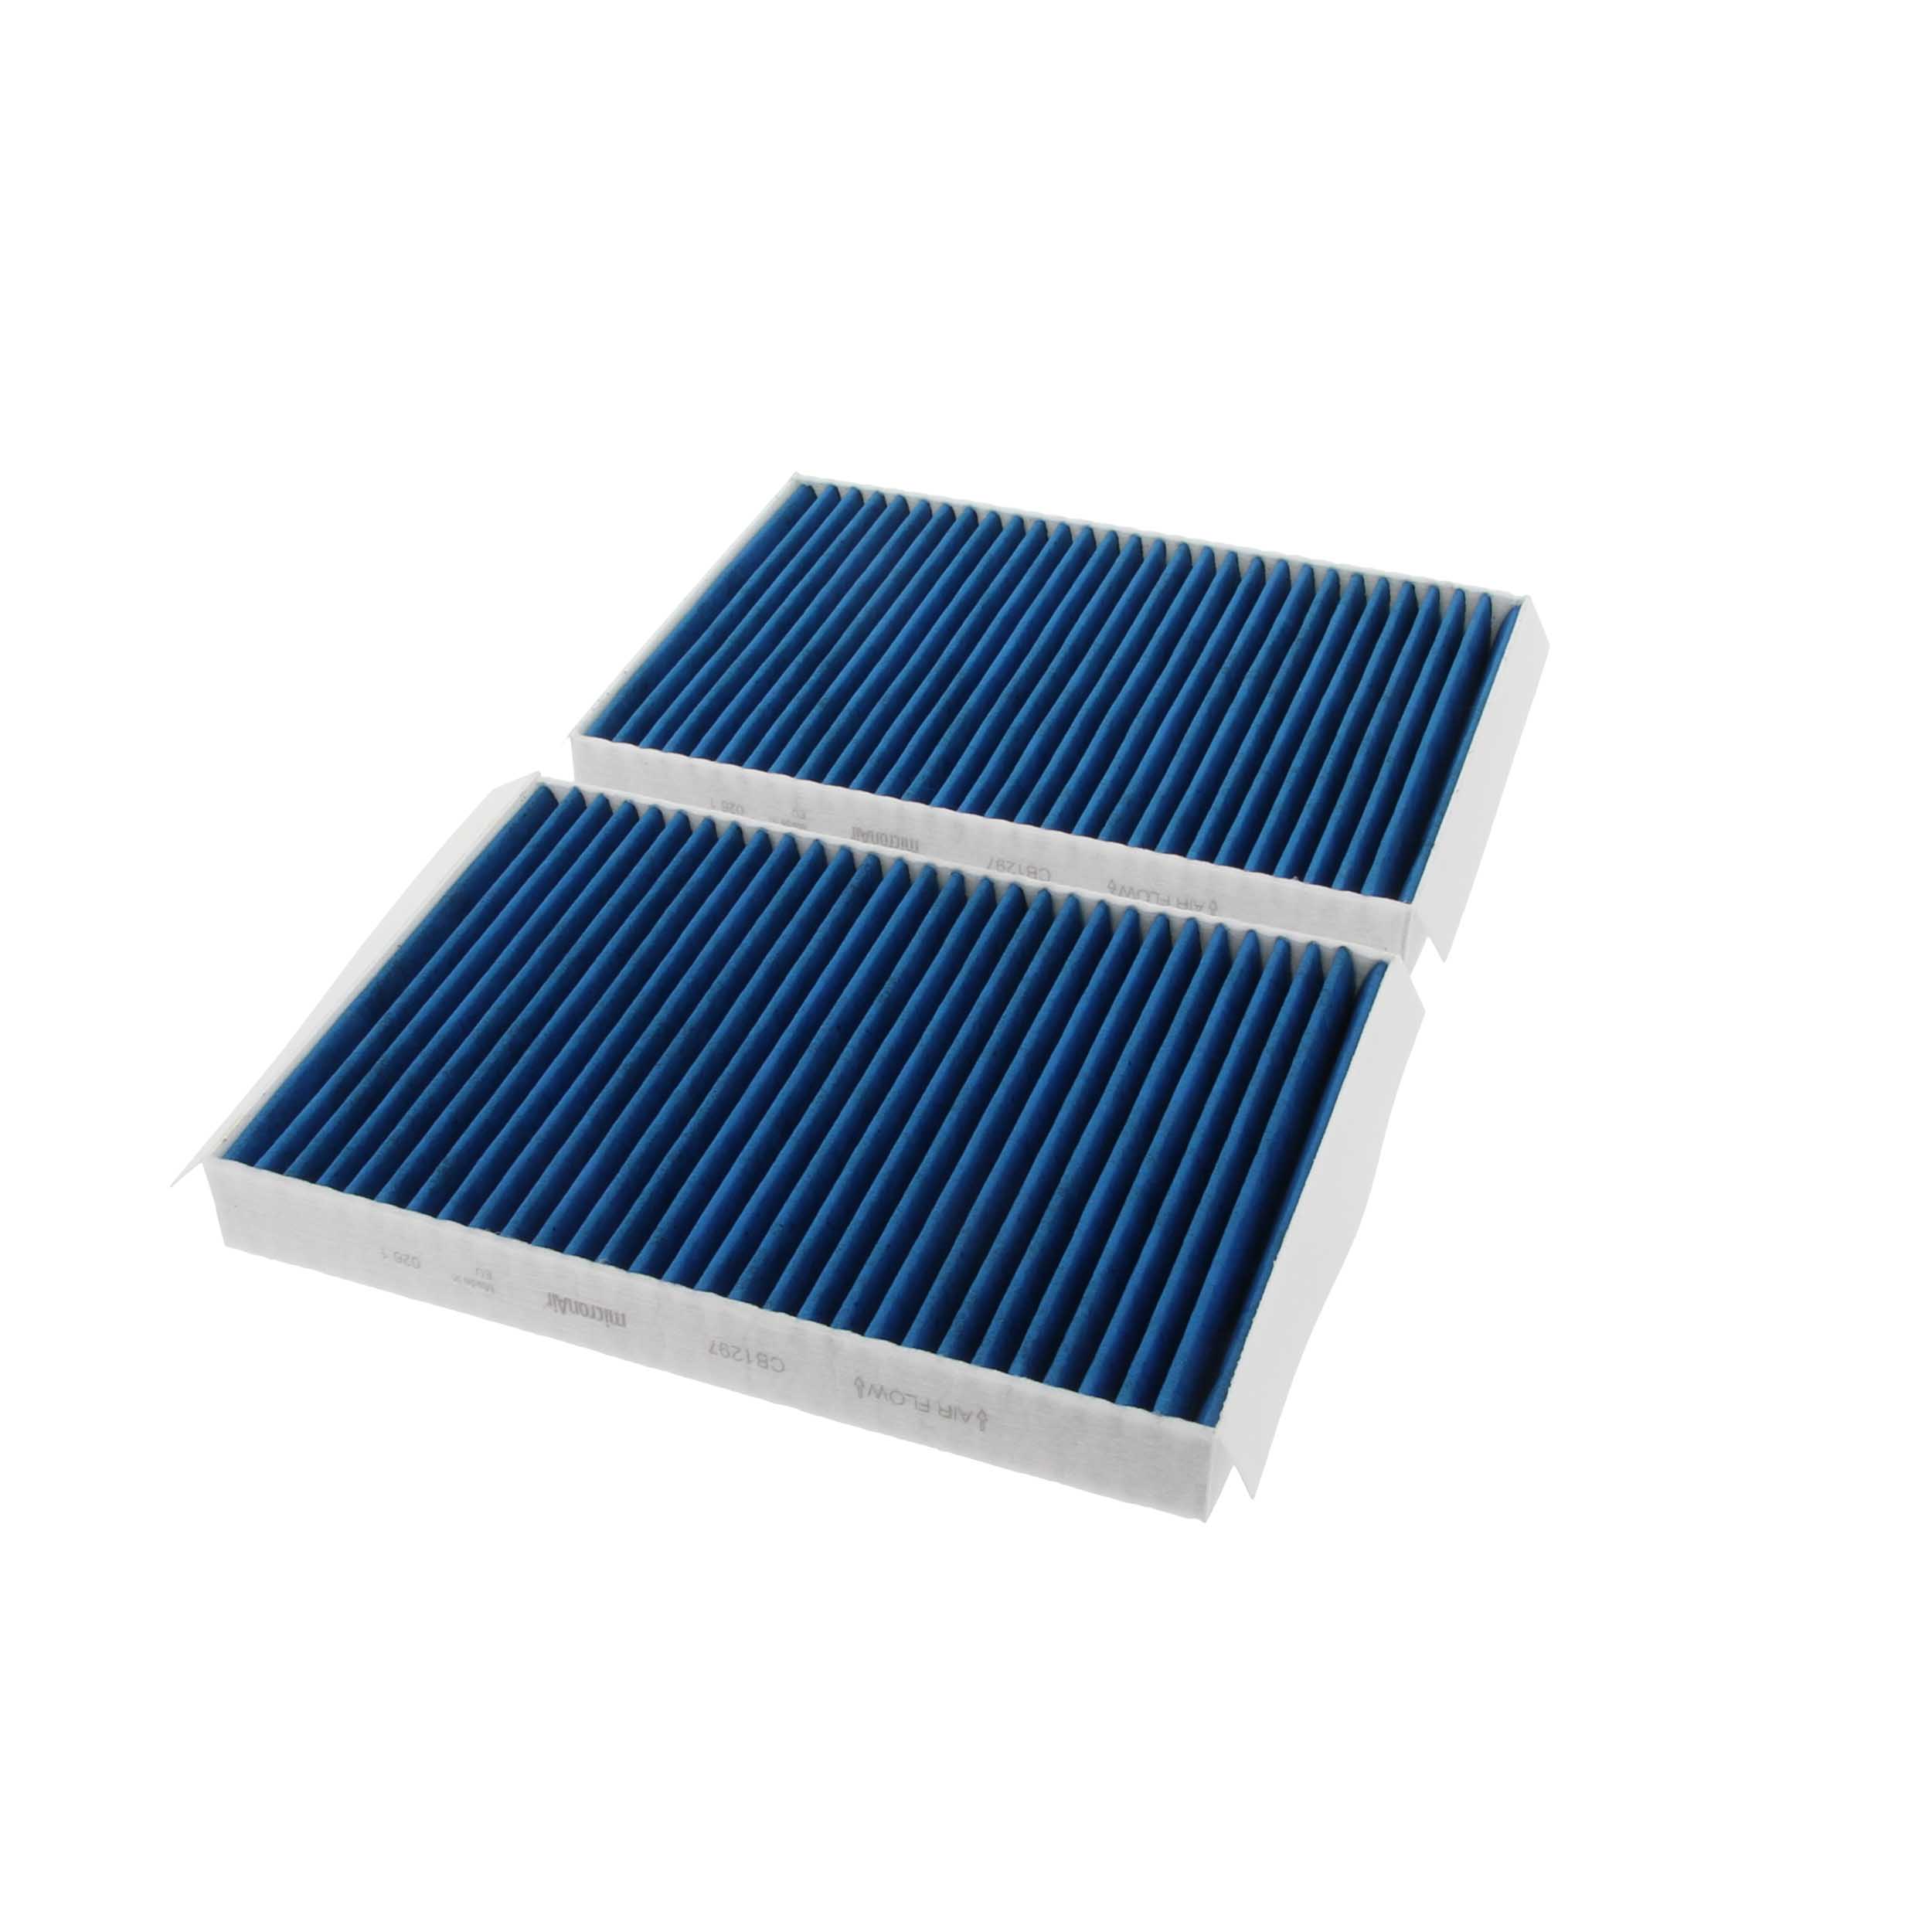 CB1297 CORTECO Particulate filter (PM 2.5), with anti-allergic effect, with antibacterial action, with fungicidal effect, 262 mm x 184 mm x 31 mm Width: 184mm, Height: 31mm, Length: 262mm Cabin filter 49455778 buy